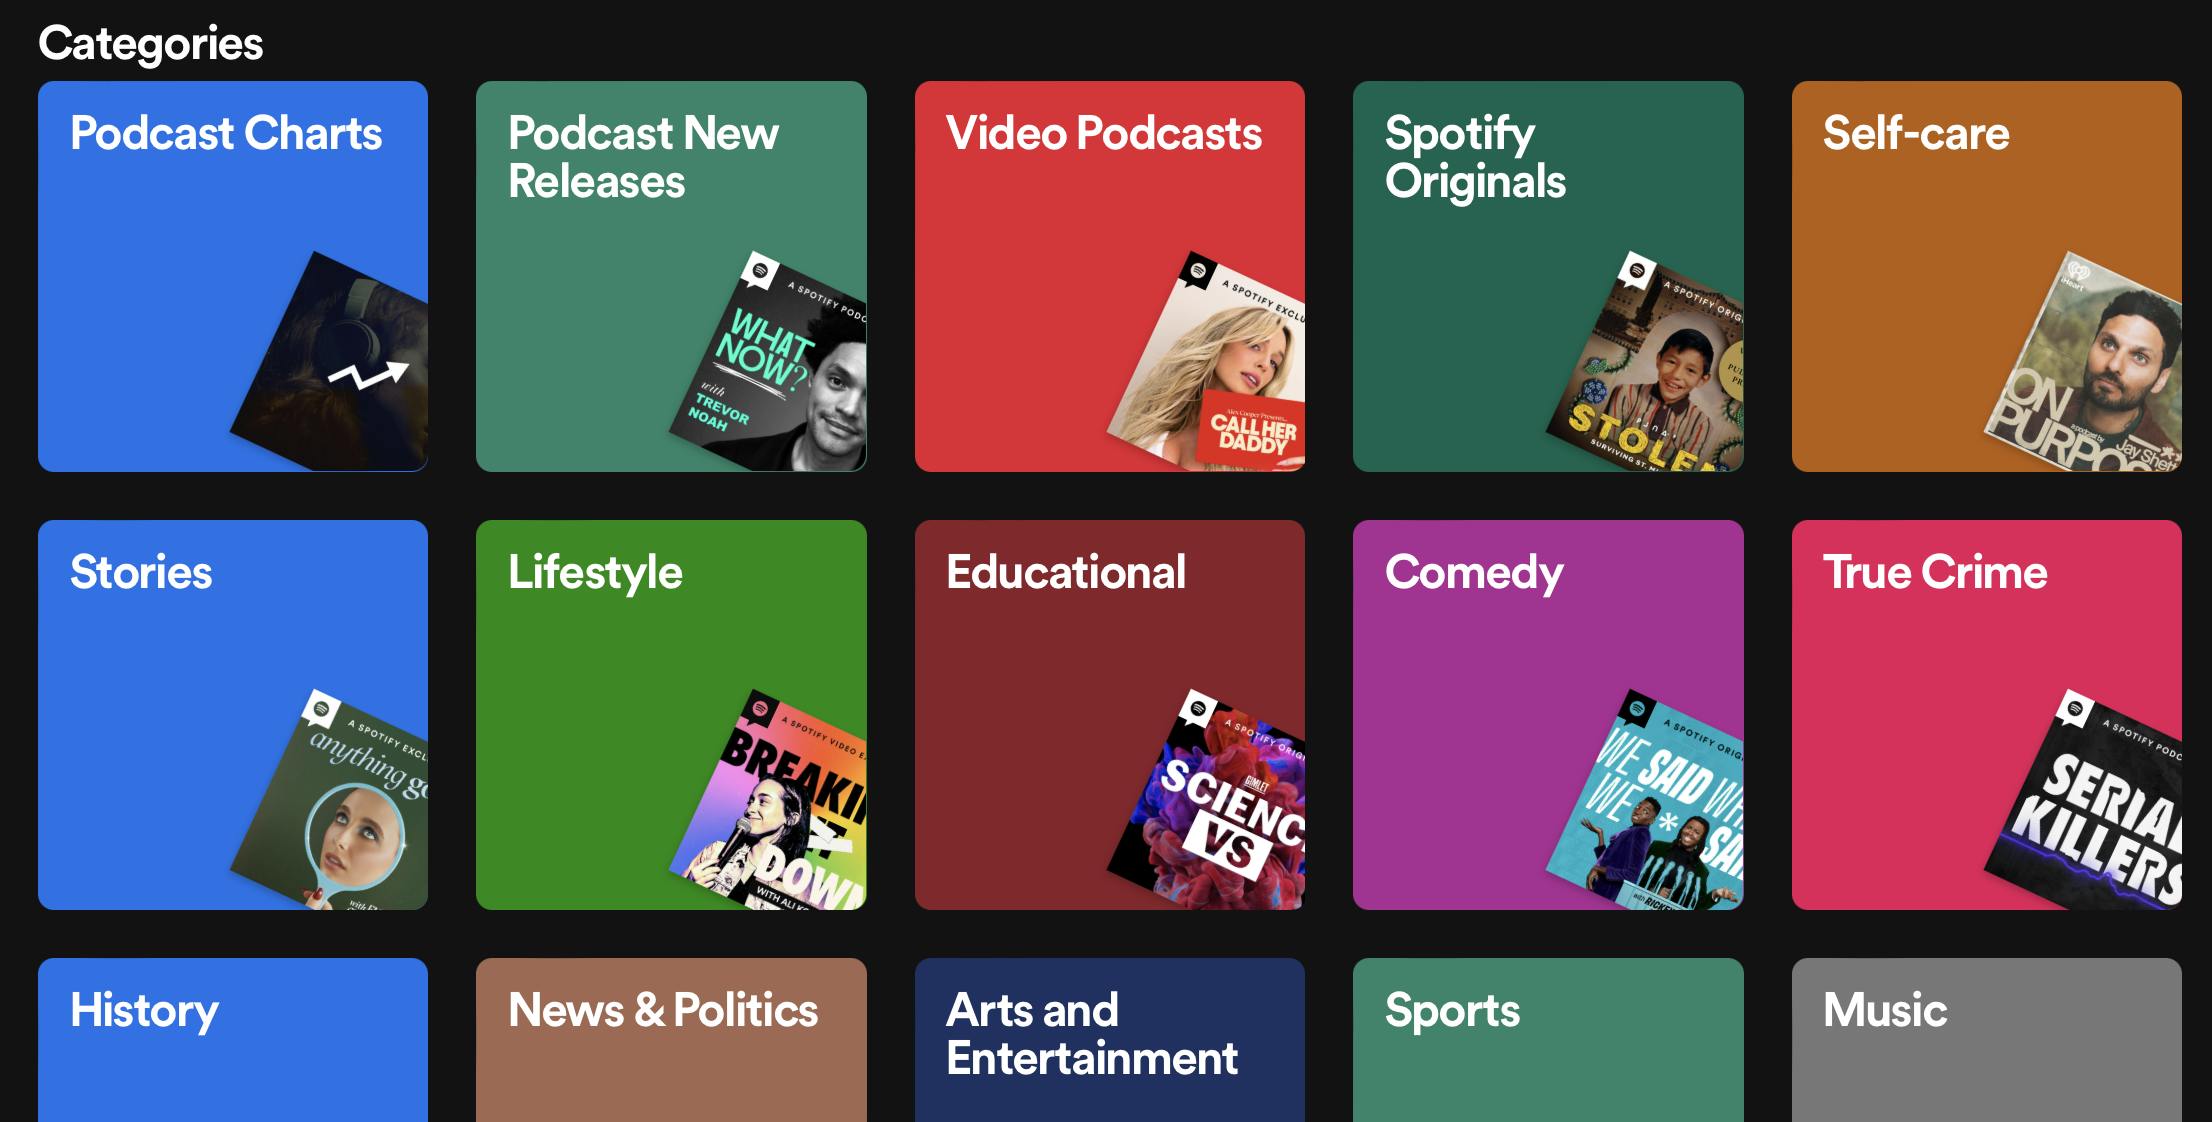 Spotify opens its podcast catalog to third-party apps, but not for